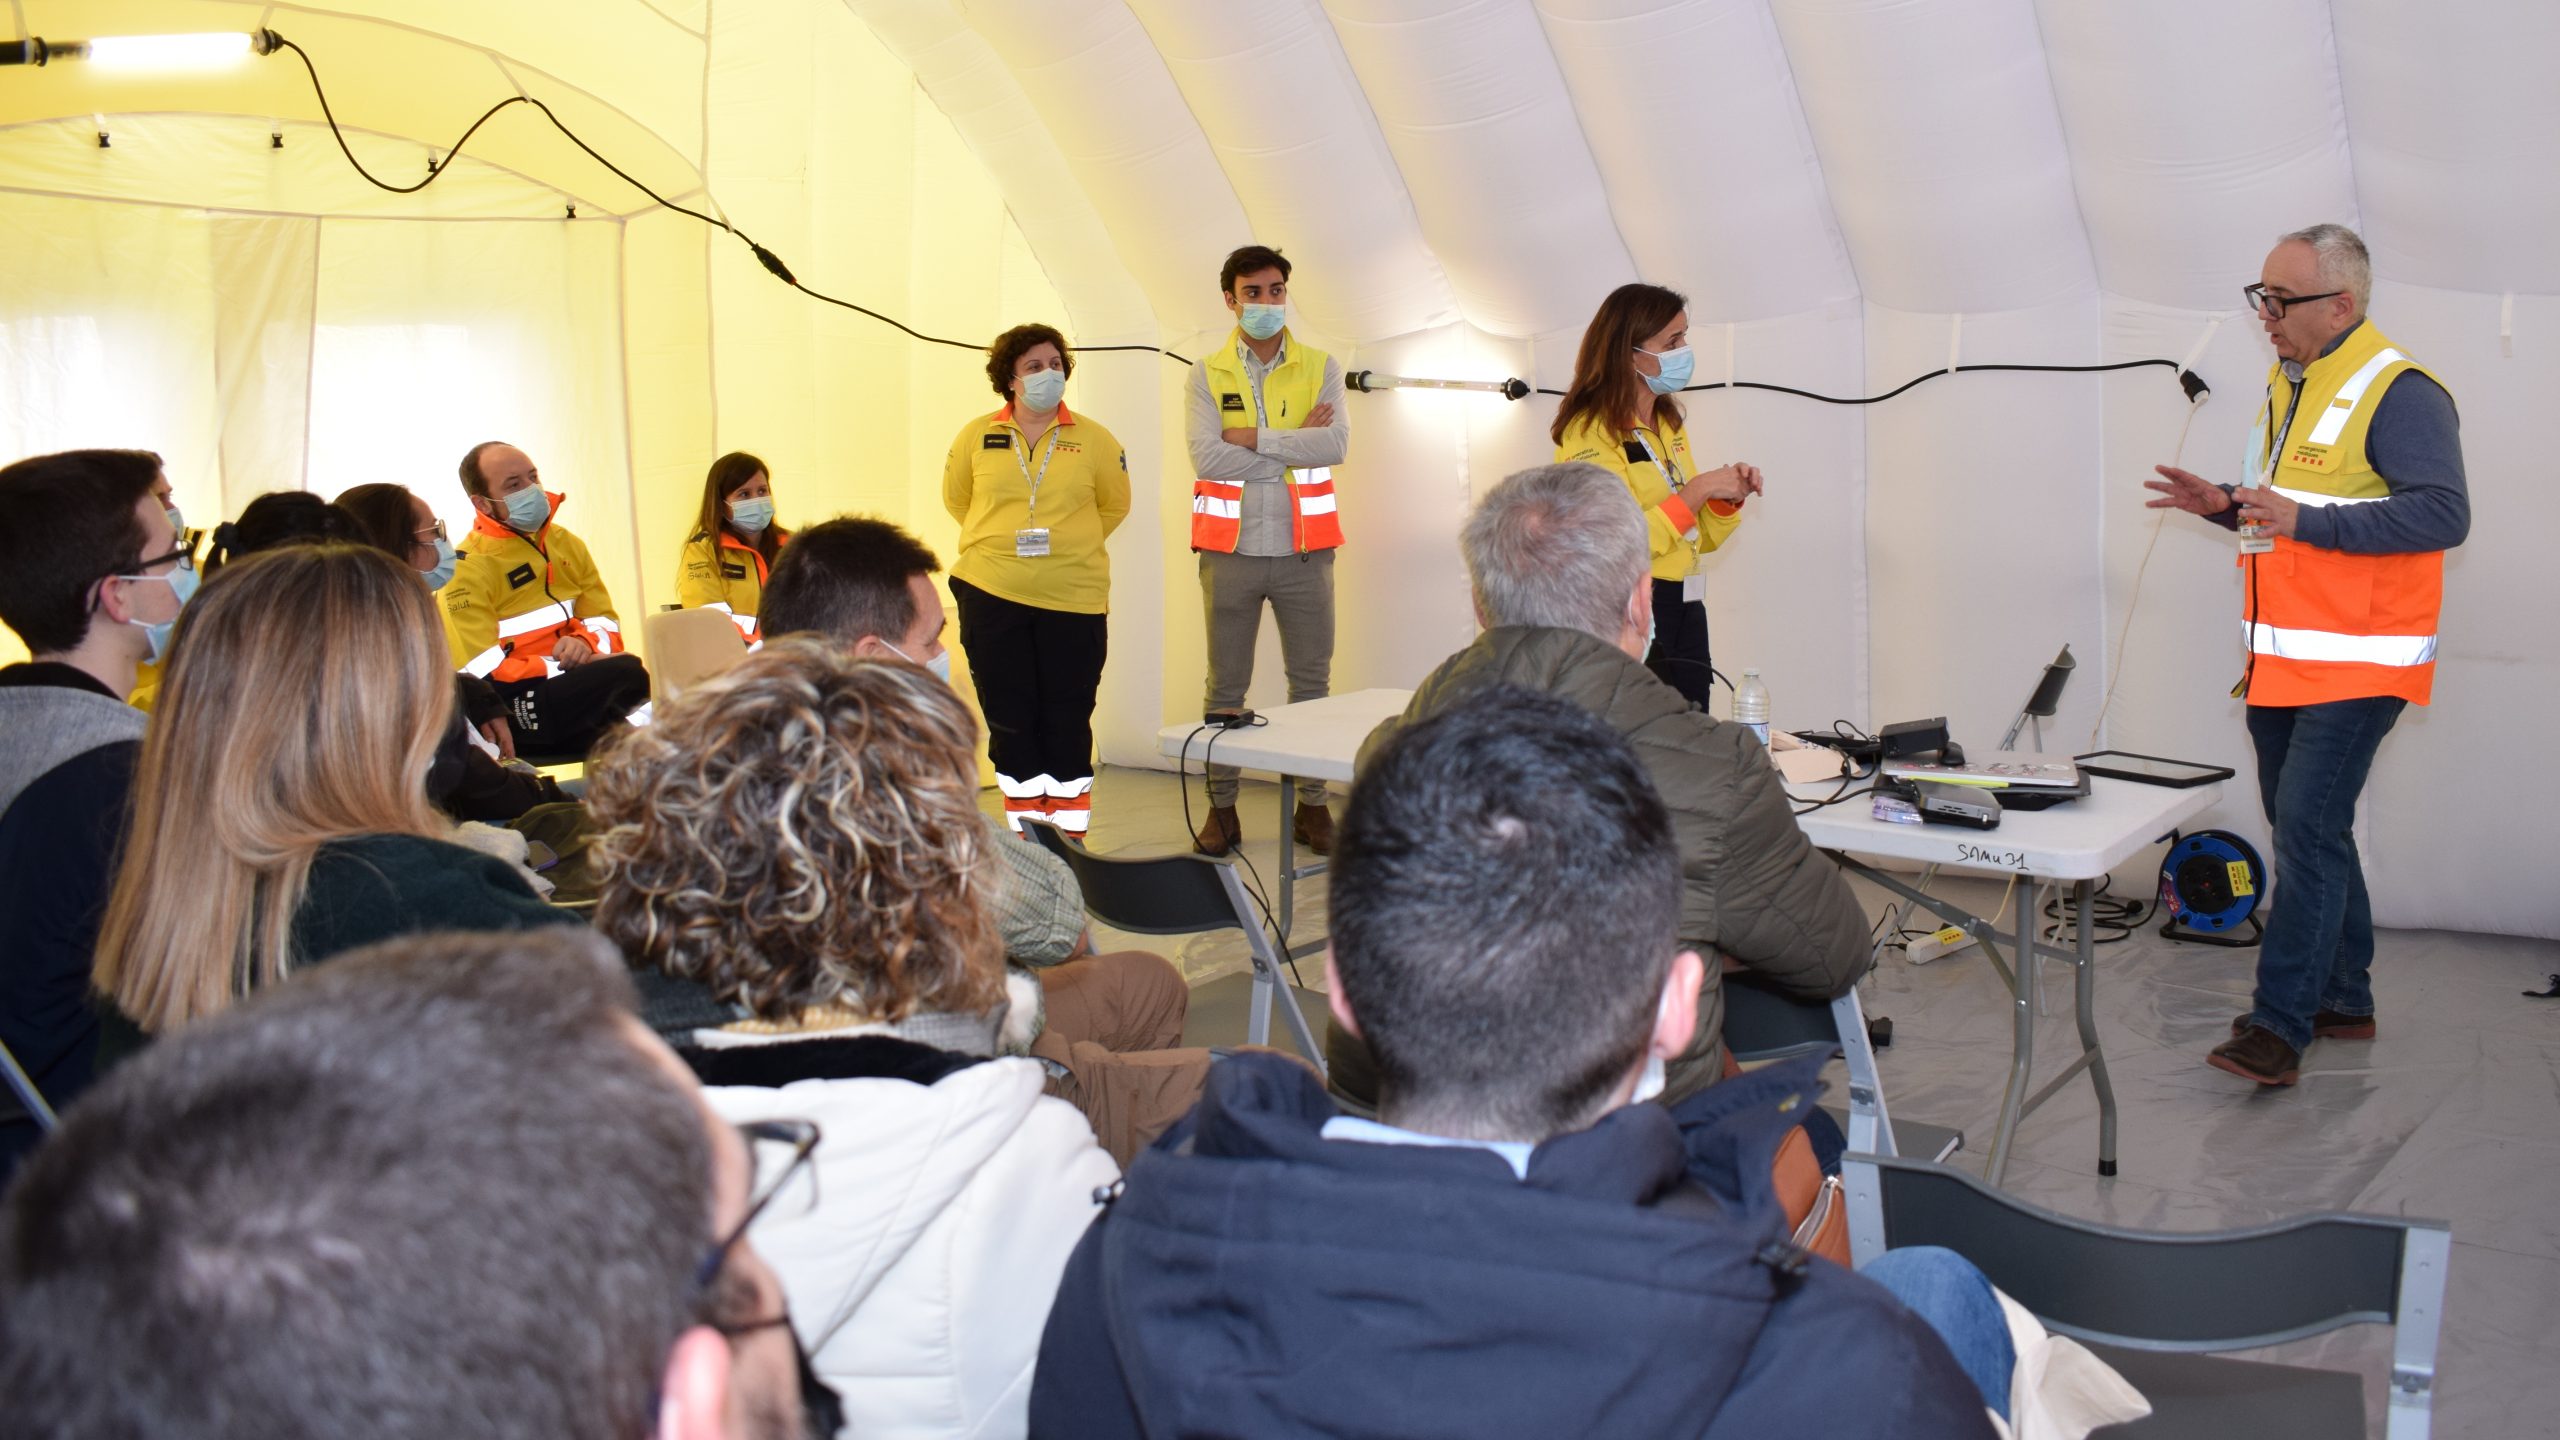 The first workshop of the EGALURG project brings together more than 130 expert professionals in emergency and disasters medicine of the Pyrenees area